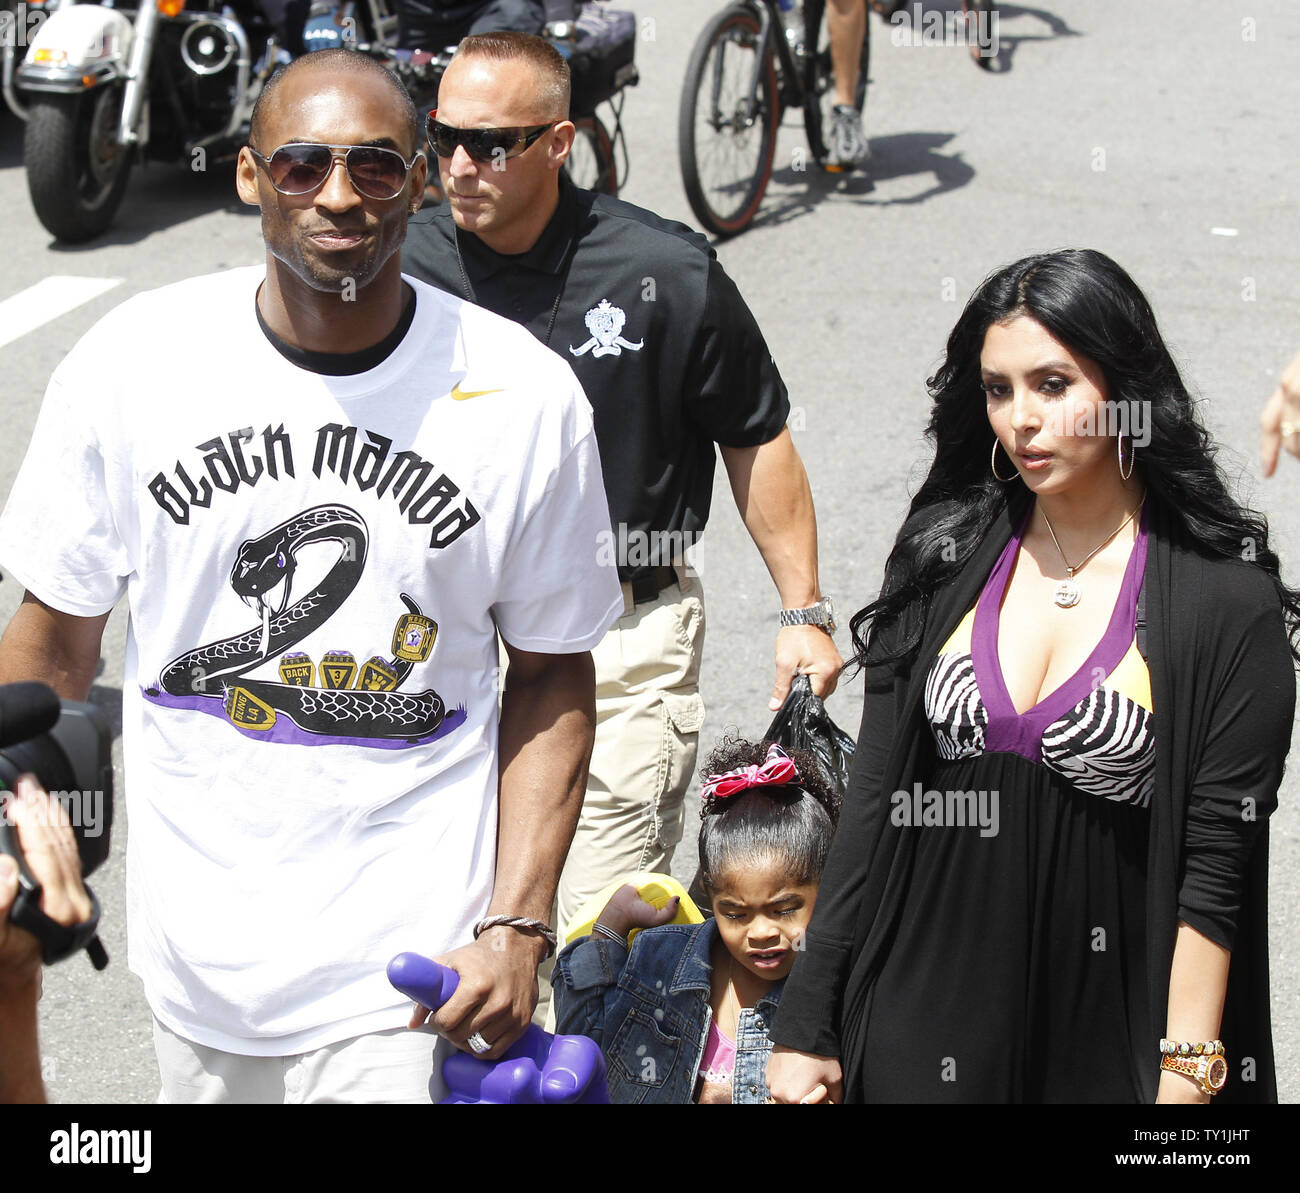 21 June 2010 - Los Angeles, California - 2010 NBA Finals MVP Kobe Bryant,  center, celebrates his fifth NBA championship with the Los Angeles Lakers  during a victory parade for the Lakers